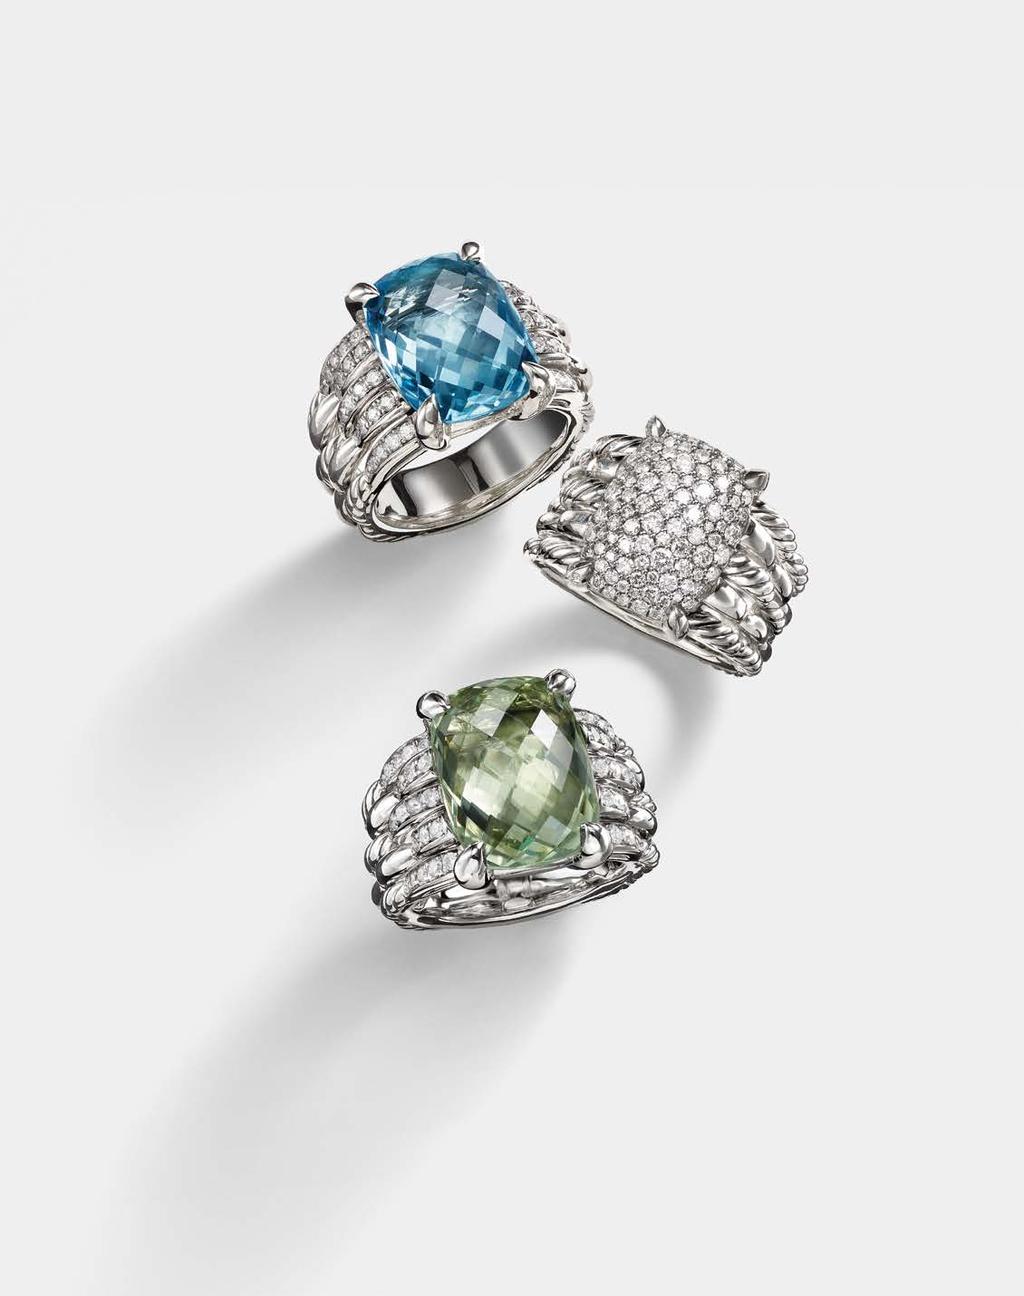 Tides ring in sterling silver with blue topaz and pavé white diamonds (0.39 ctw), starting at $1,950.